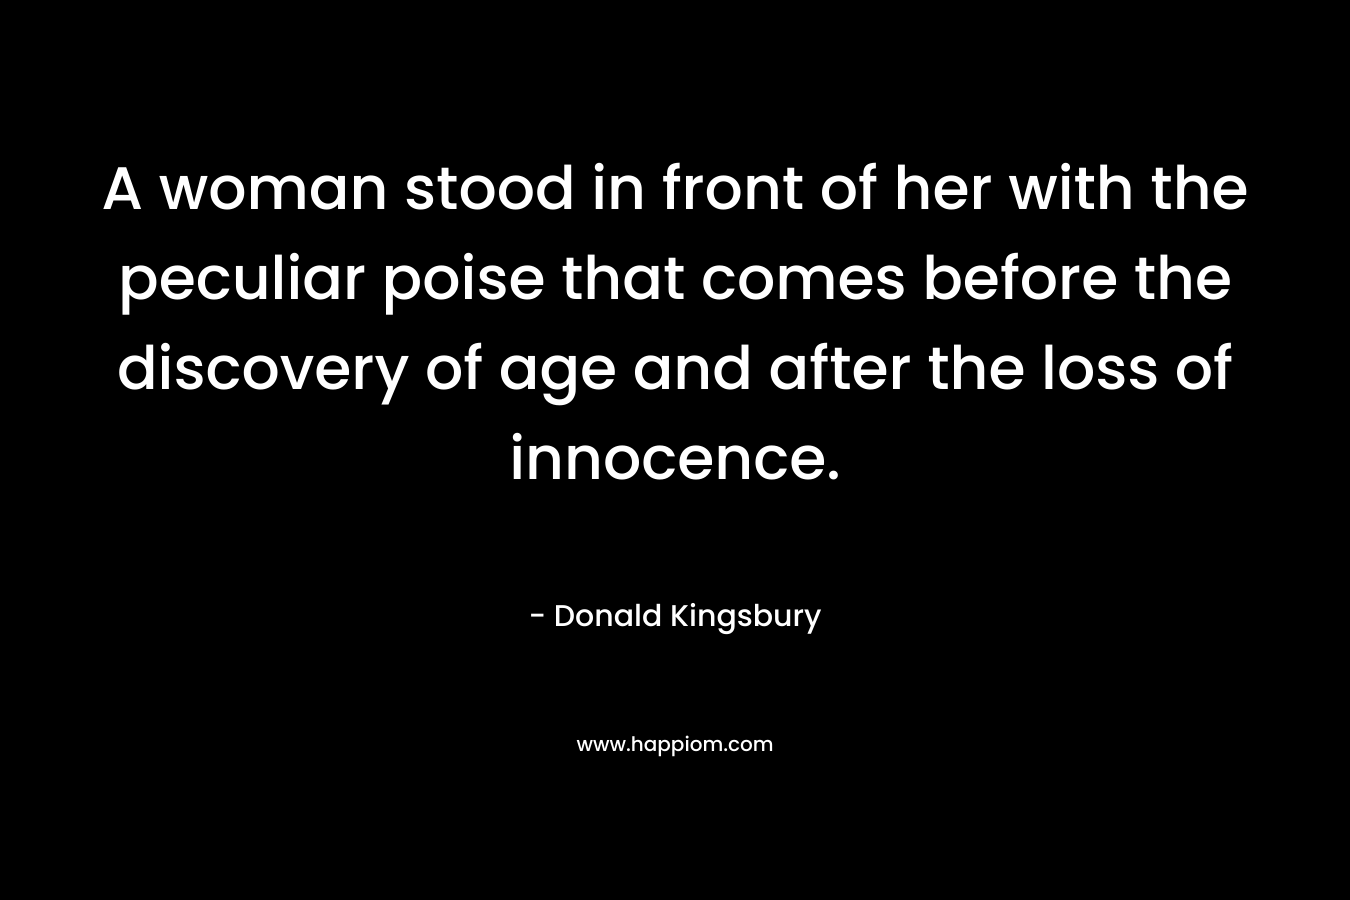 A woman stood in front of her with the peculiar poise that comes before the discovery of age and after the loss of innocence. – Donald Kingsbury